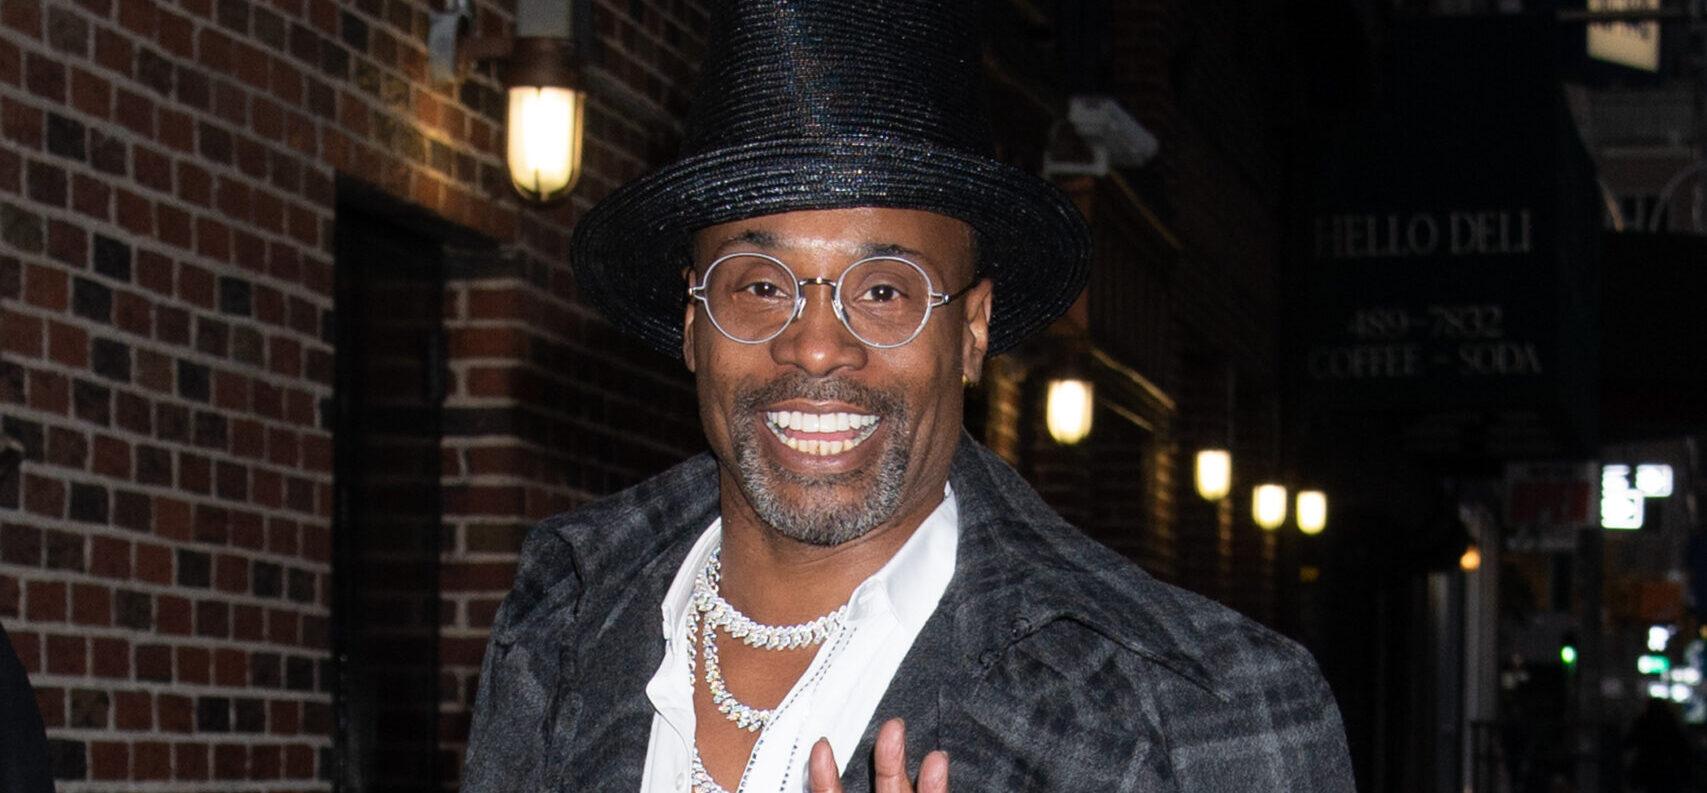 Billy Porter Says He’s ‘On The Market’ Looking For An ‘English’ Husband Amid Financial Struggles Due To Strike